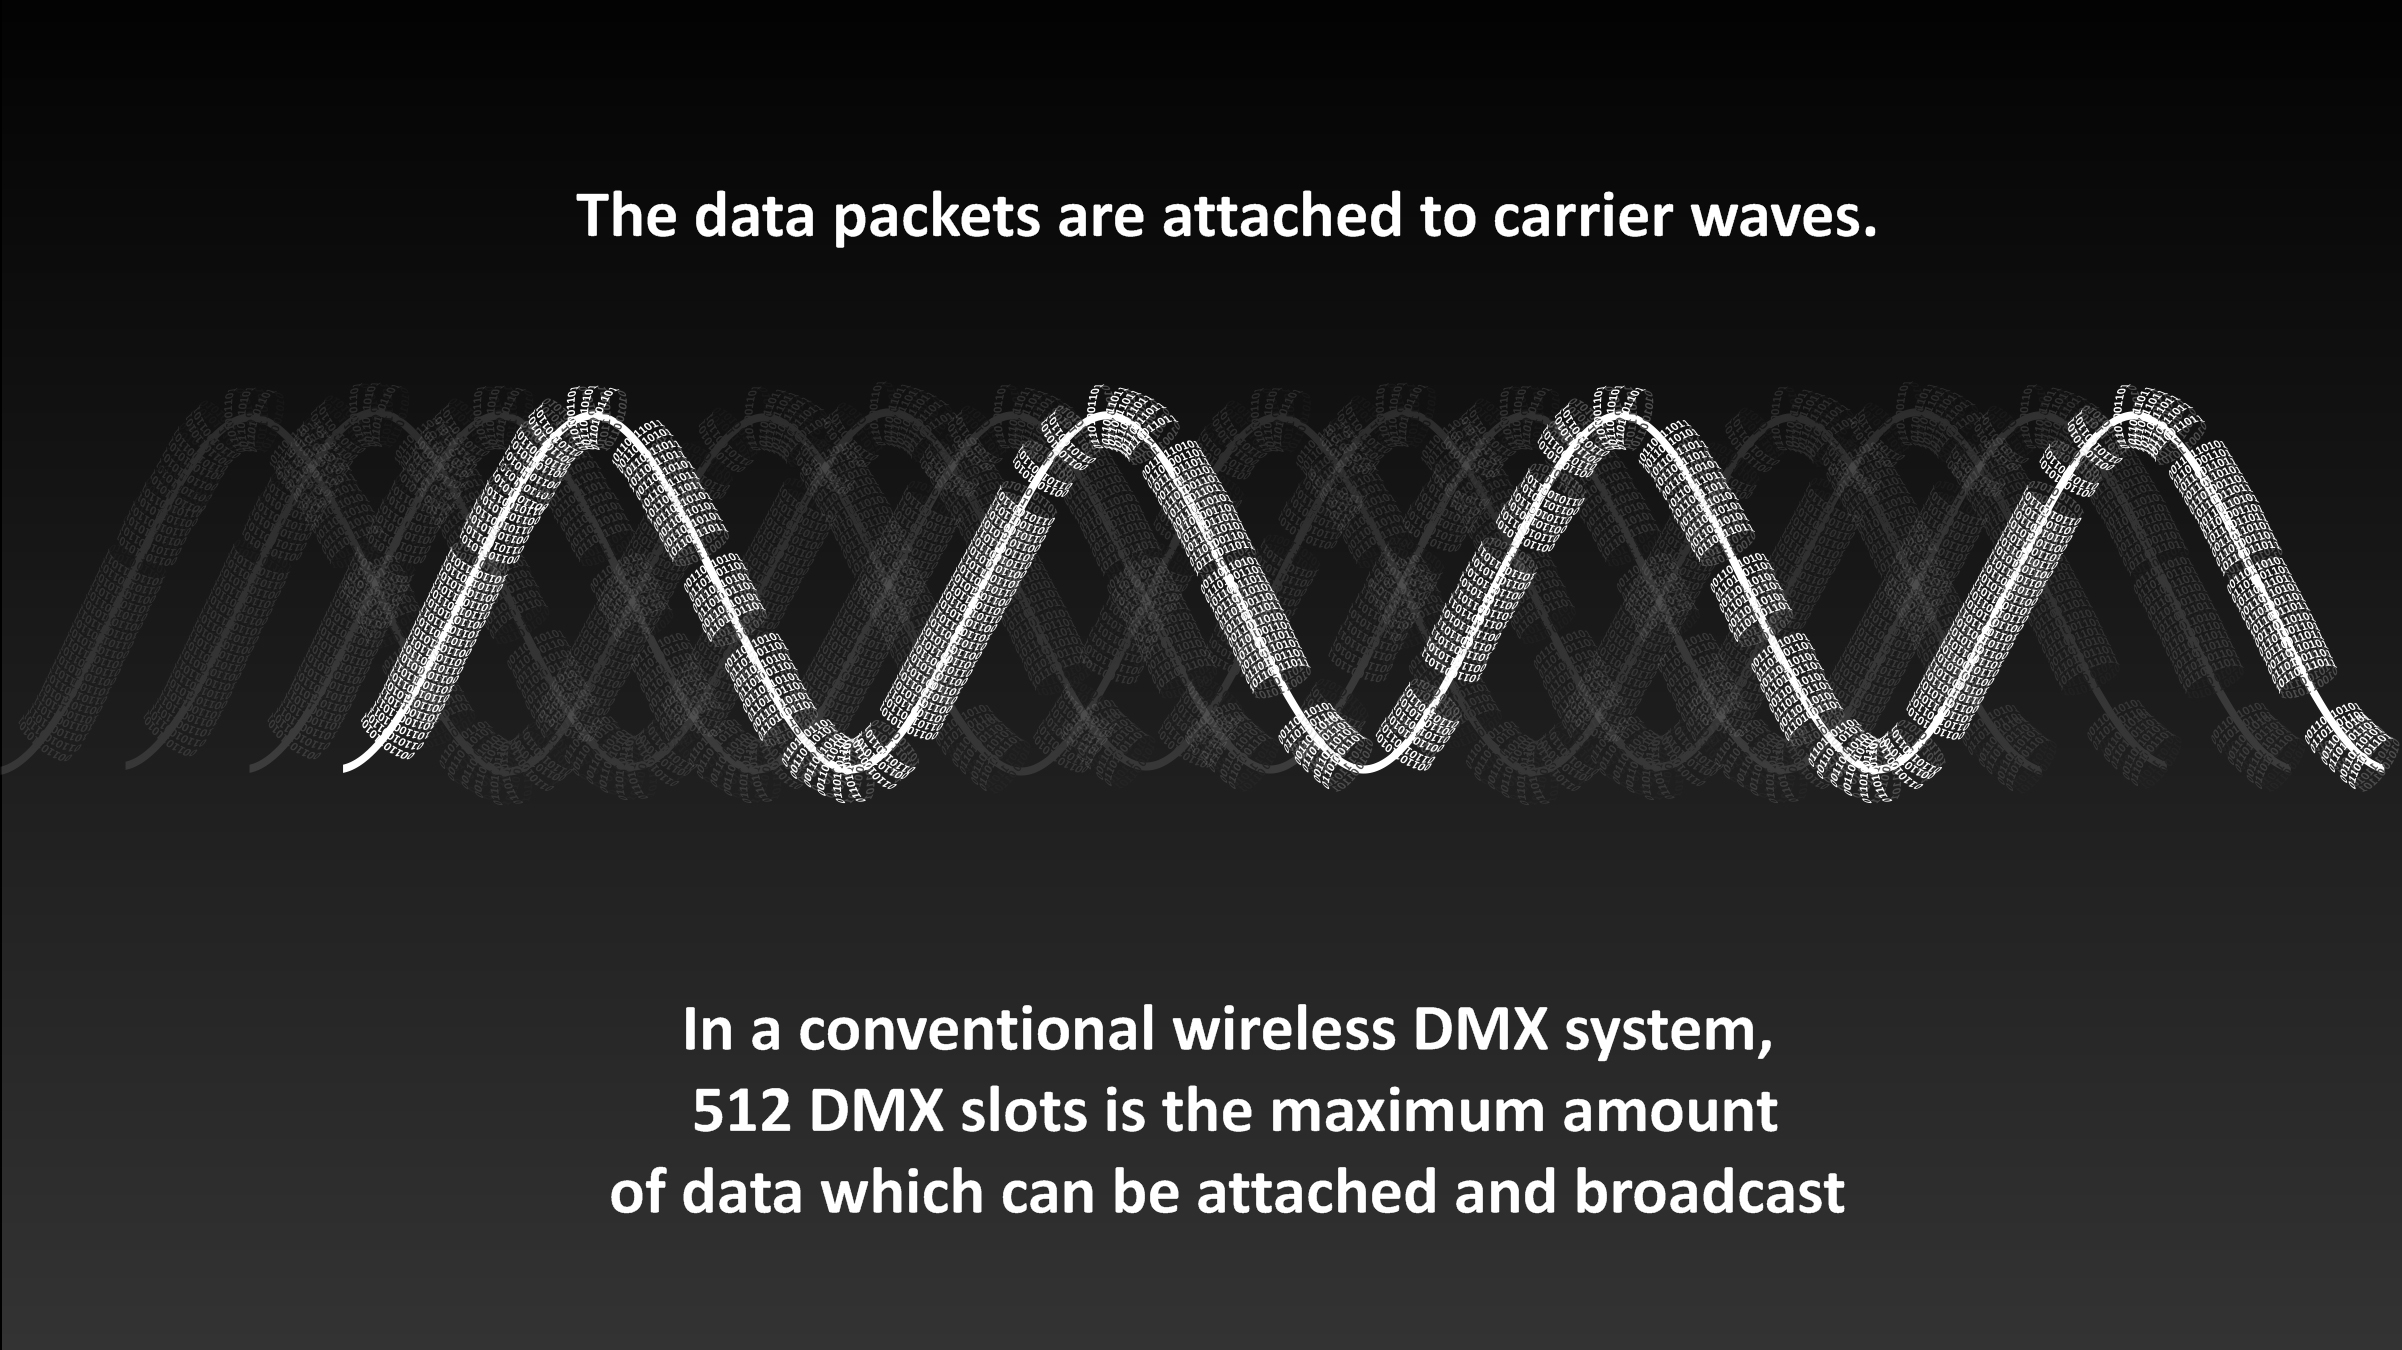 Multiverse 9 Data Packets Attached to Carrier Waves, Conventional